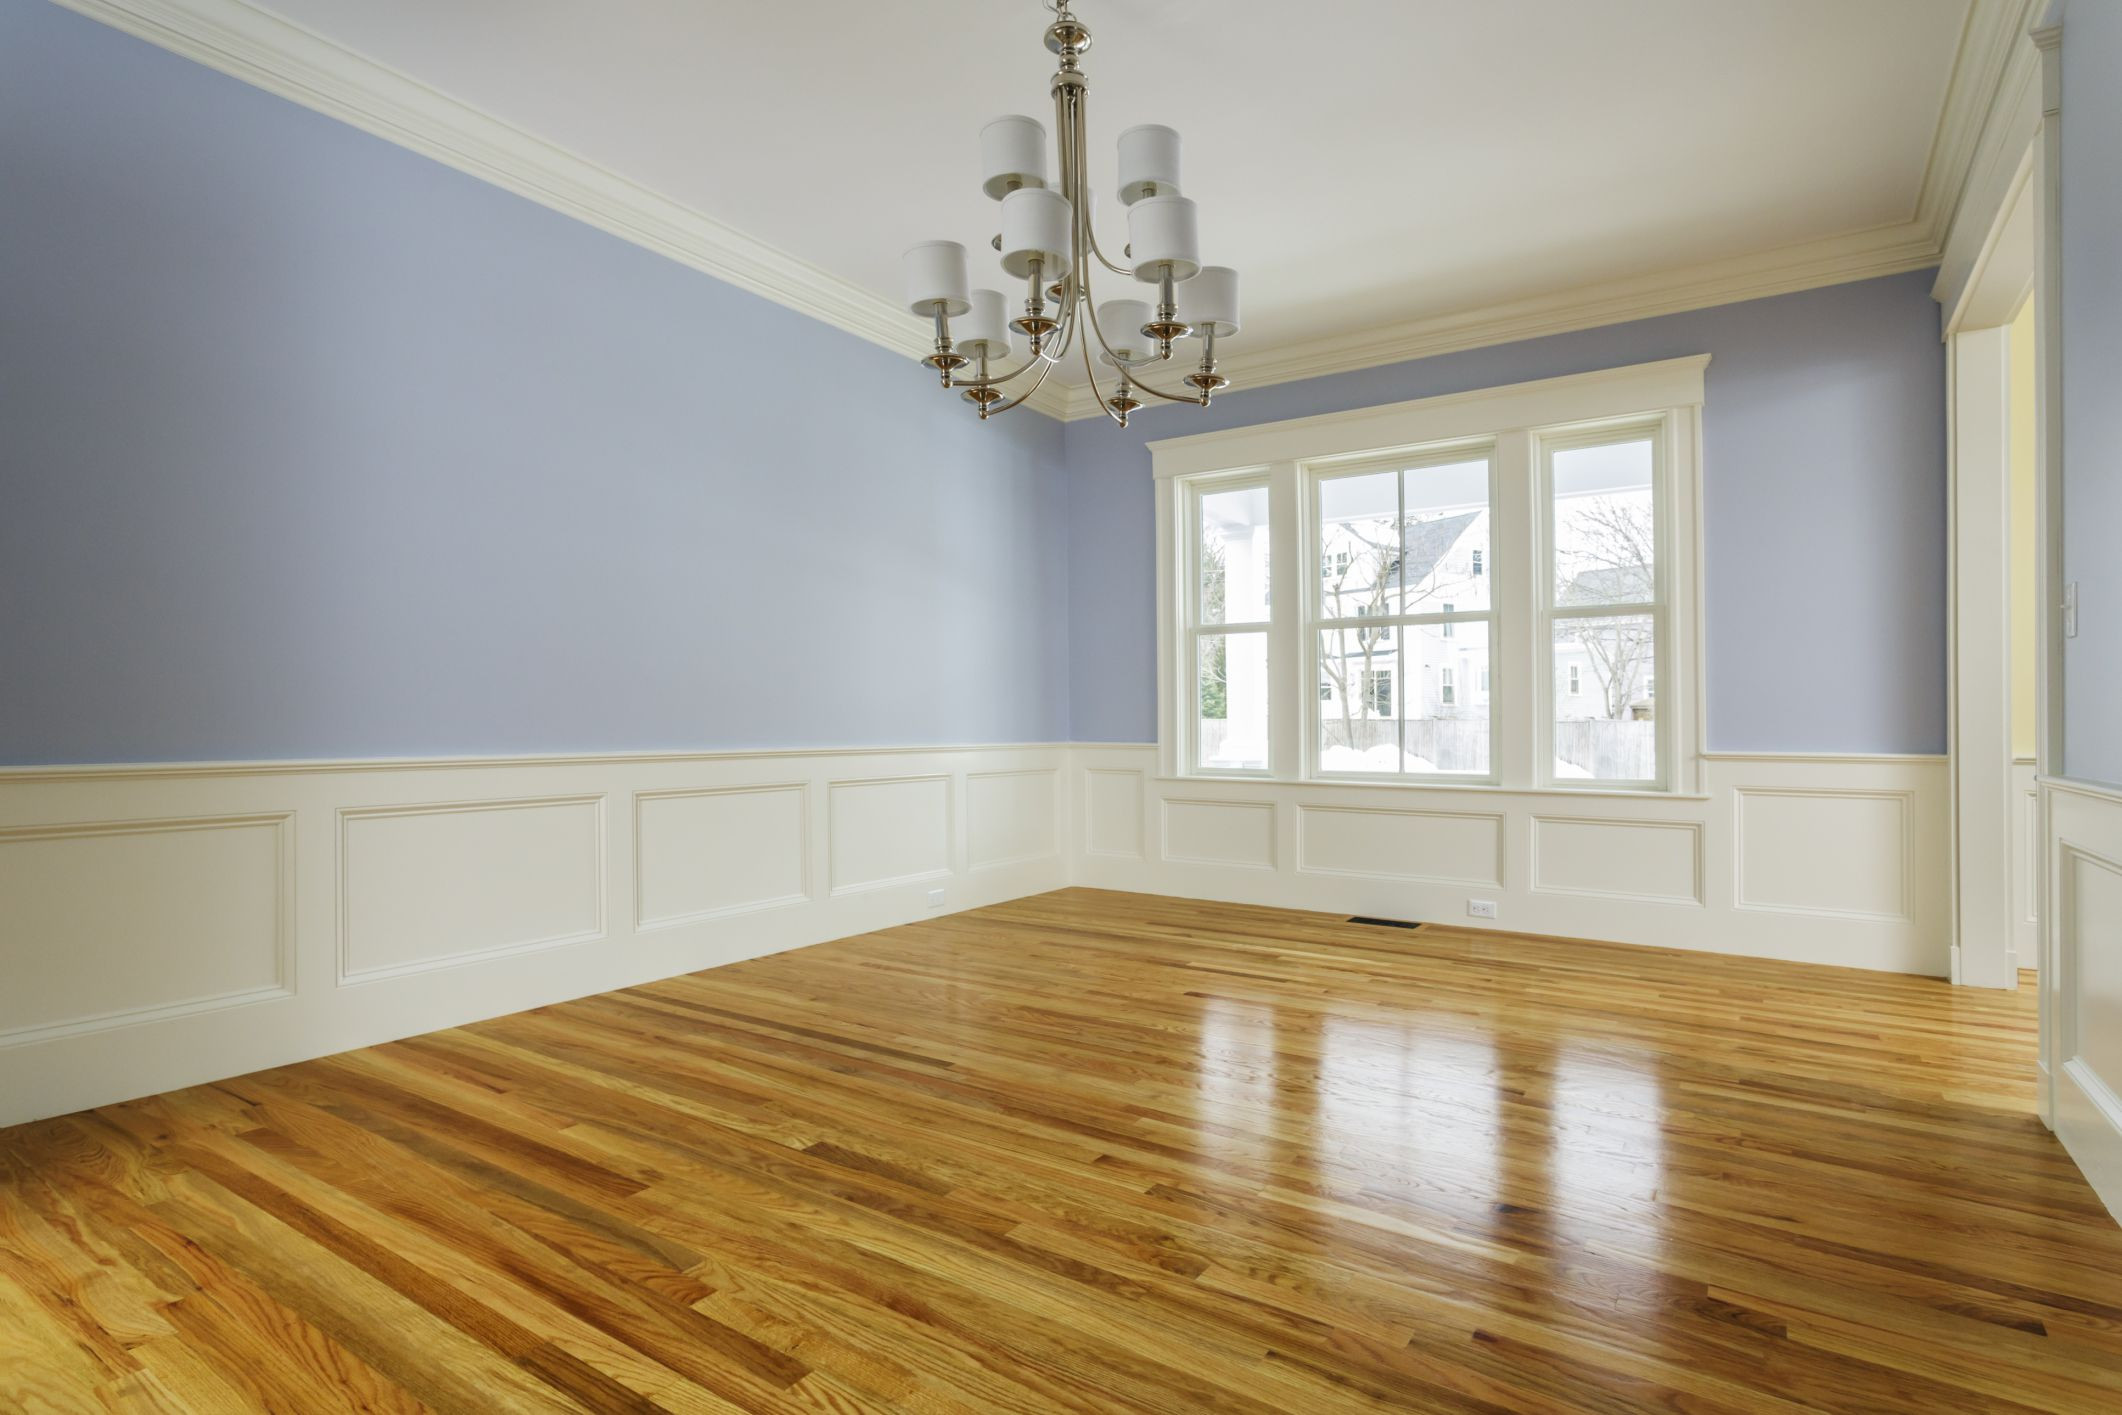 27 Fabulous How Much Does It Cost to Refinish Hardwood Floors Yourself 2024 free download how much does it cost to refinish hardwood floors yourself of the cost to refinish hardwood floors for 168686572 highres 56a2fd773df78cf7727b6cb3